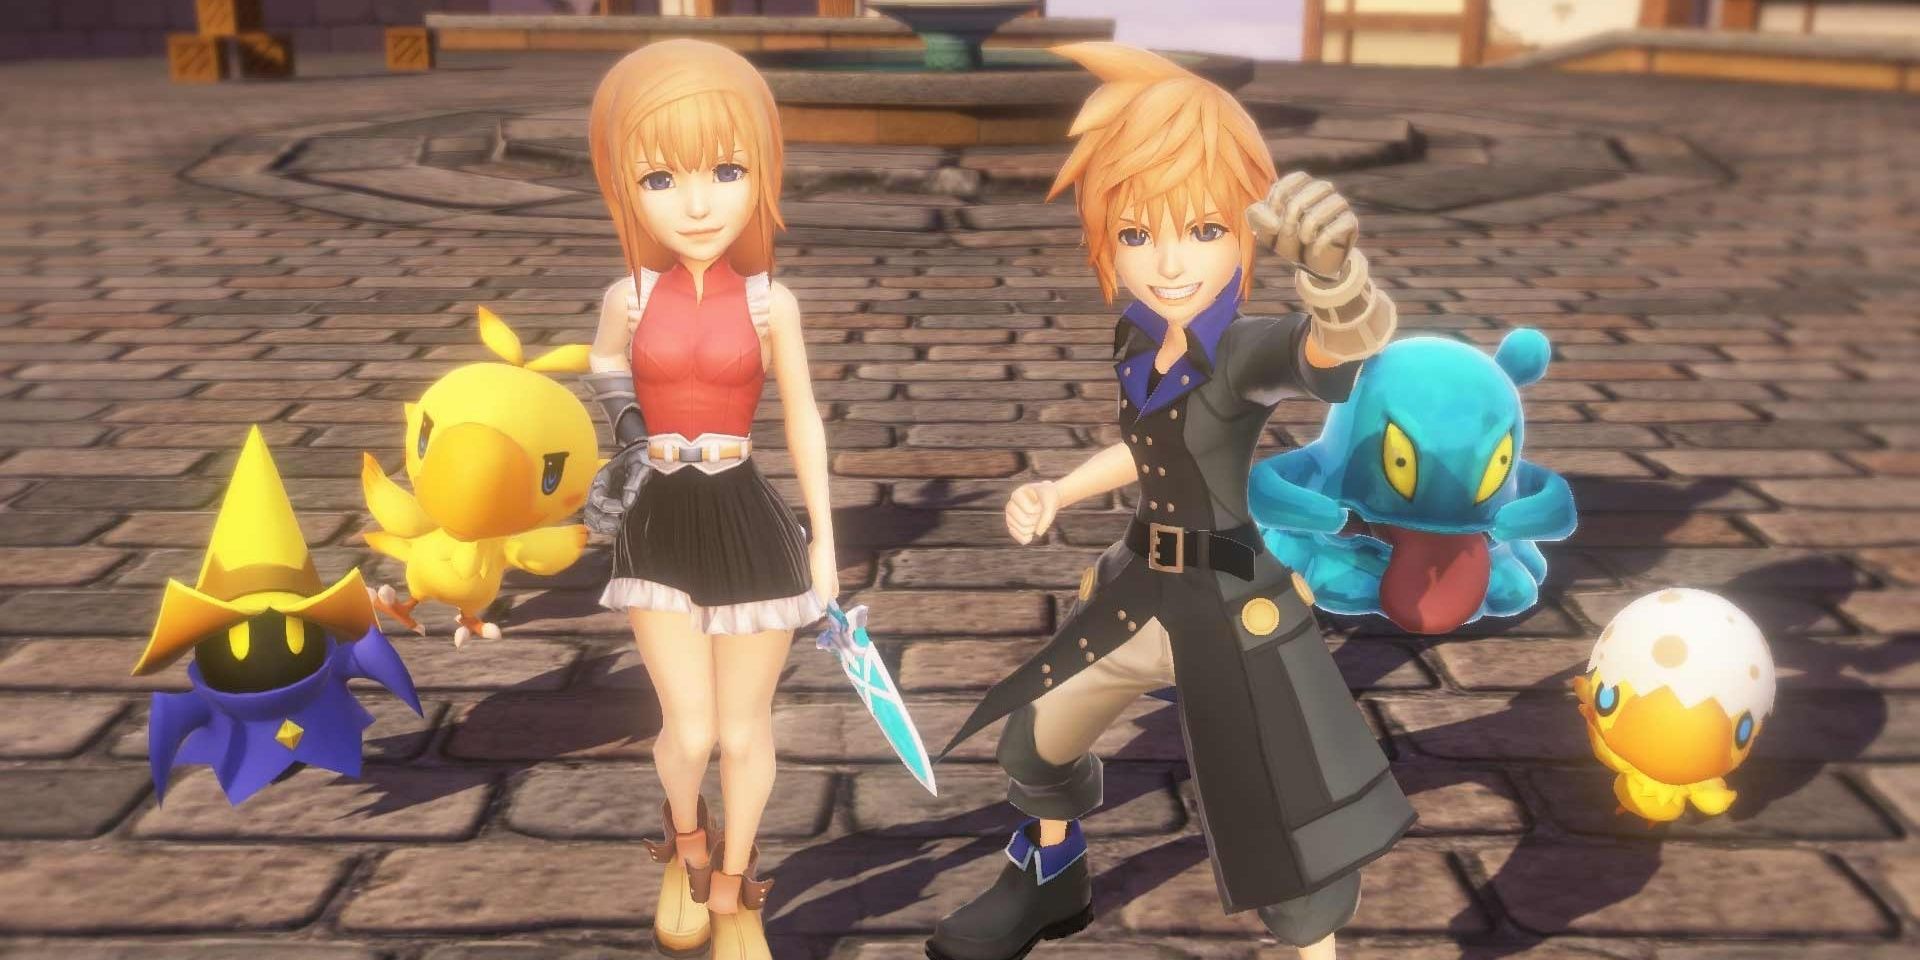 Lann and Reynn, plus many Final Fantasy characters, in World of Final Fantasy